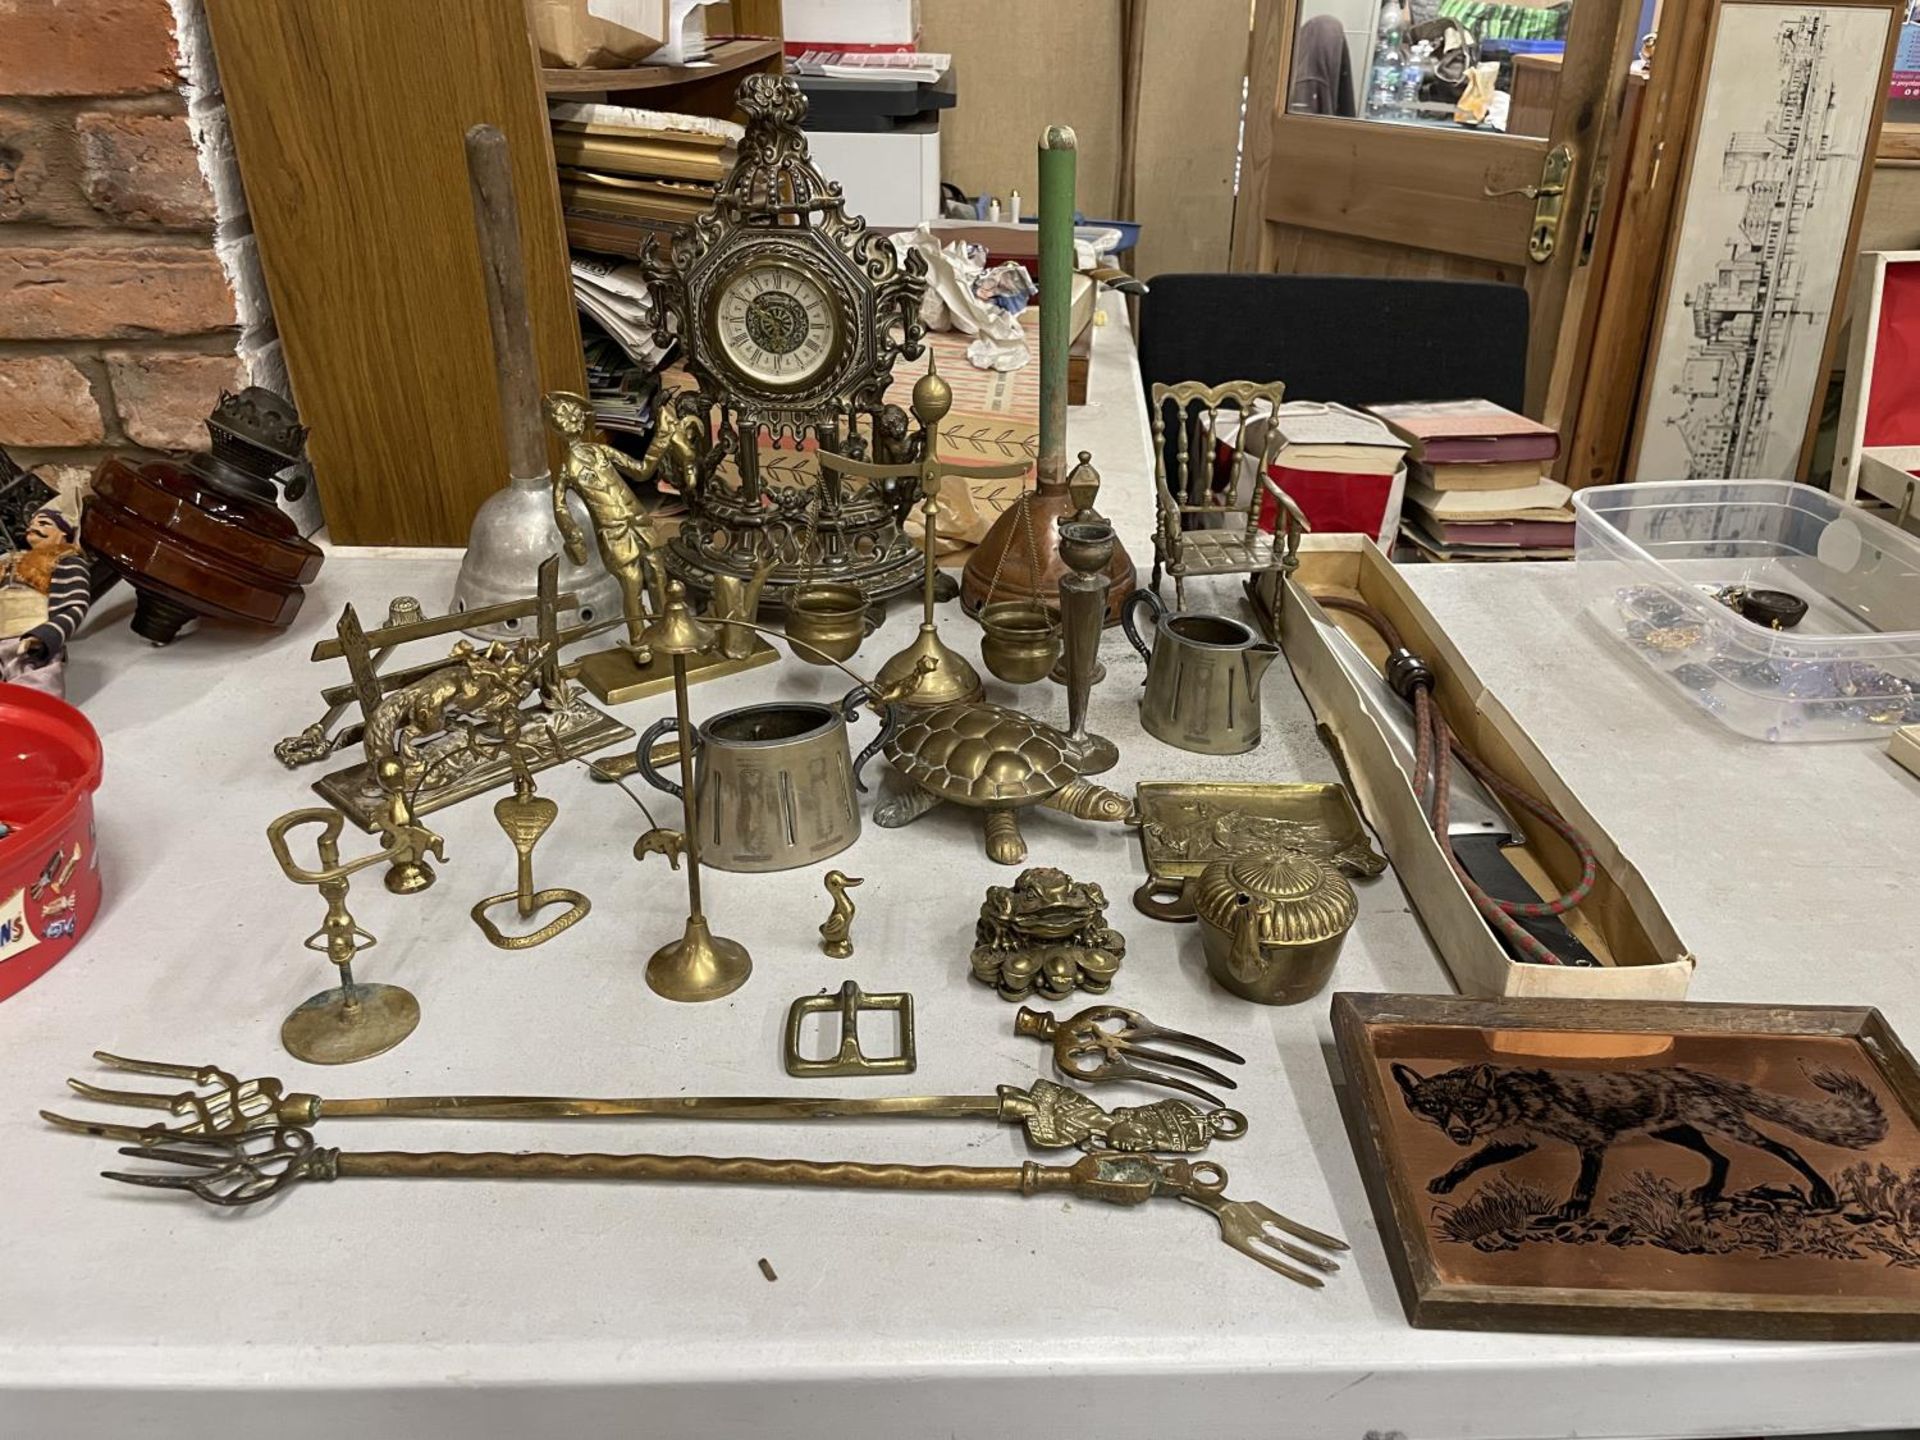 A LARGE QUANTITY OF BRASSWARE TO INCLUDE AN ORNATE MANTLE CLOCK, TOASTING FORKS, ANIMALS, ETC